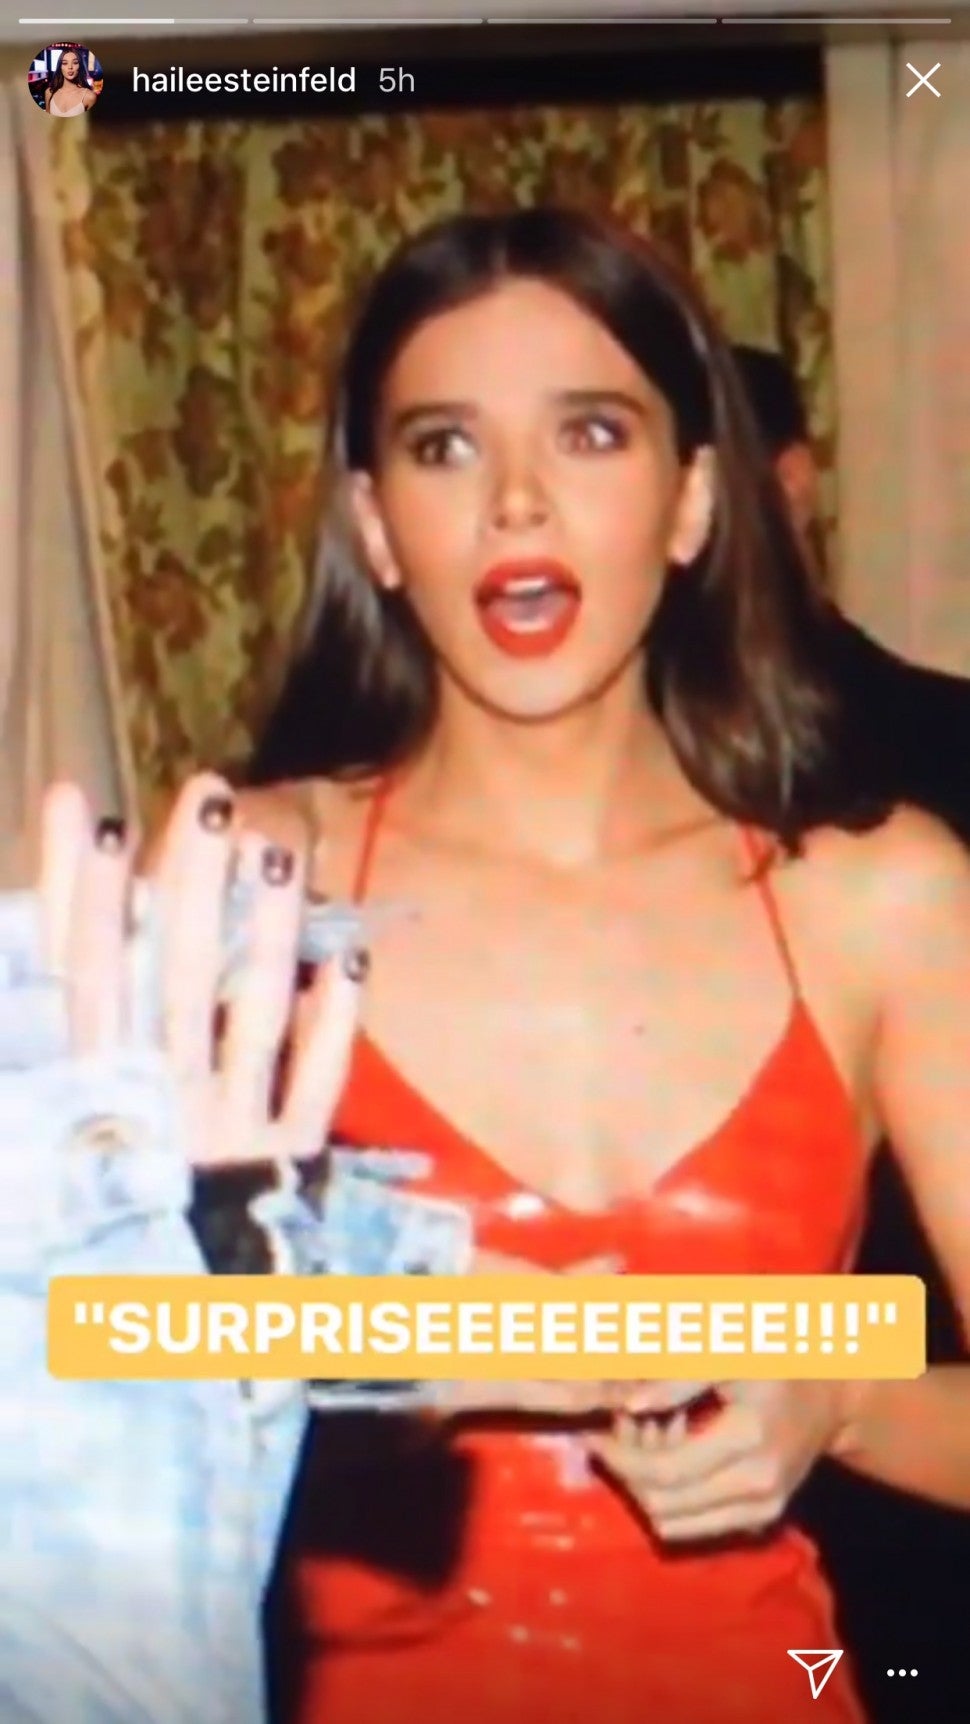 Hailee Steinfeld surprised at her birthday party